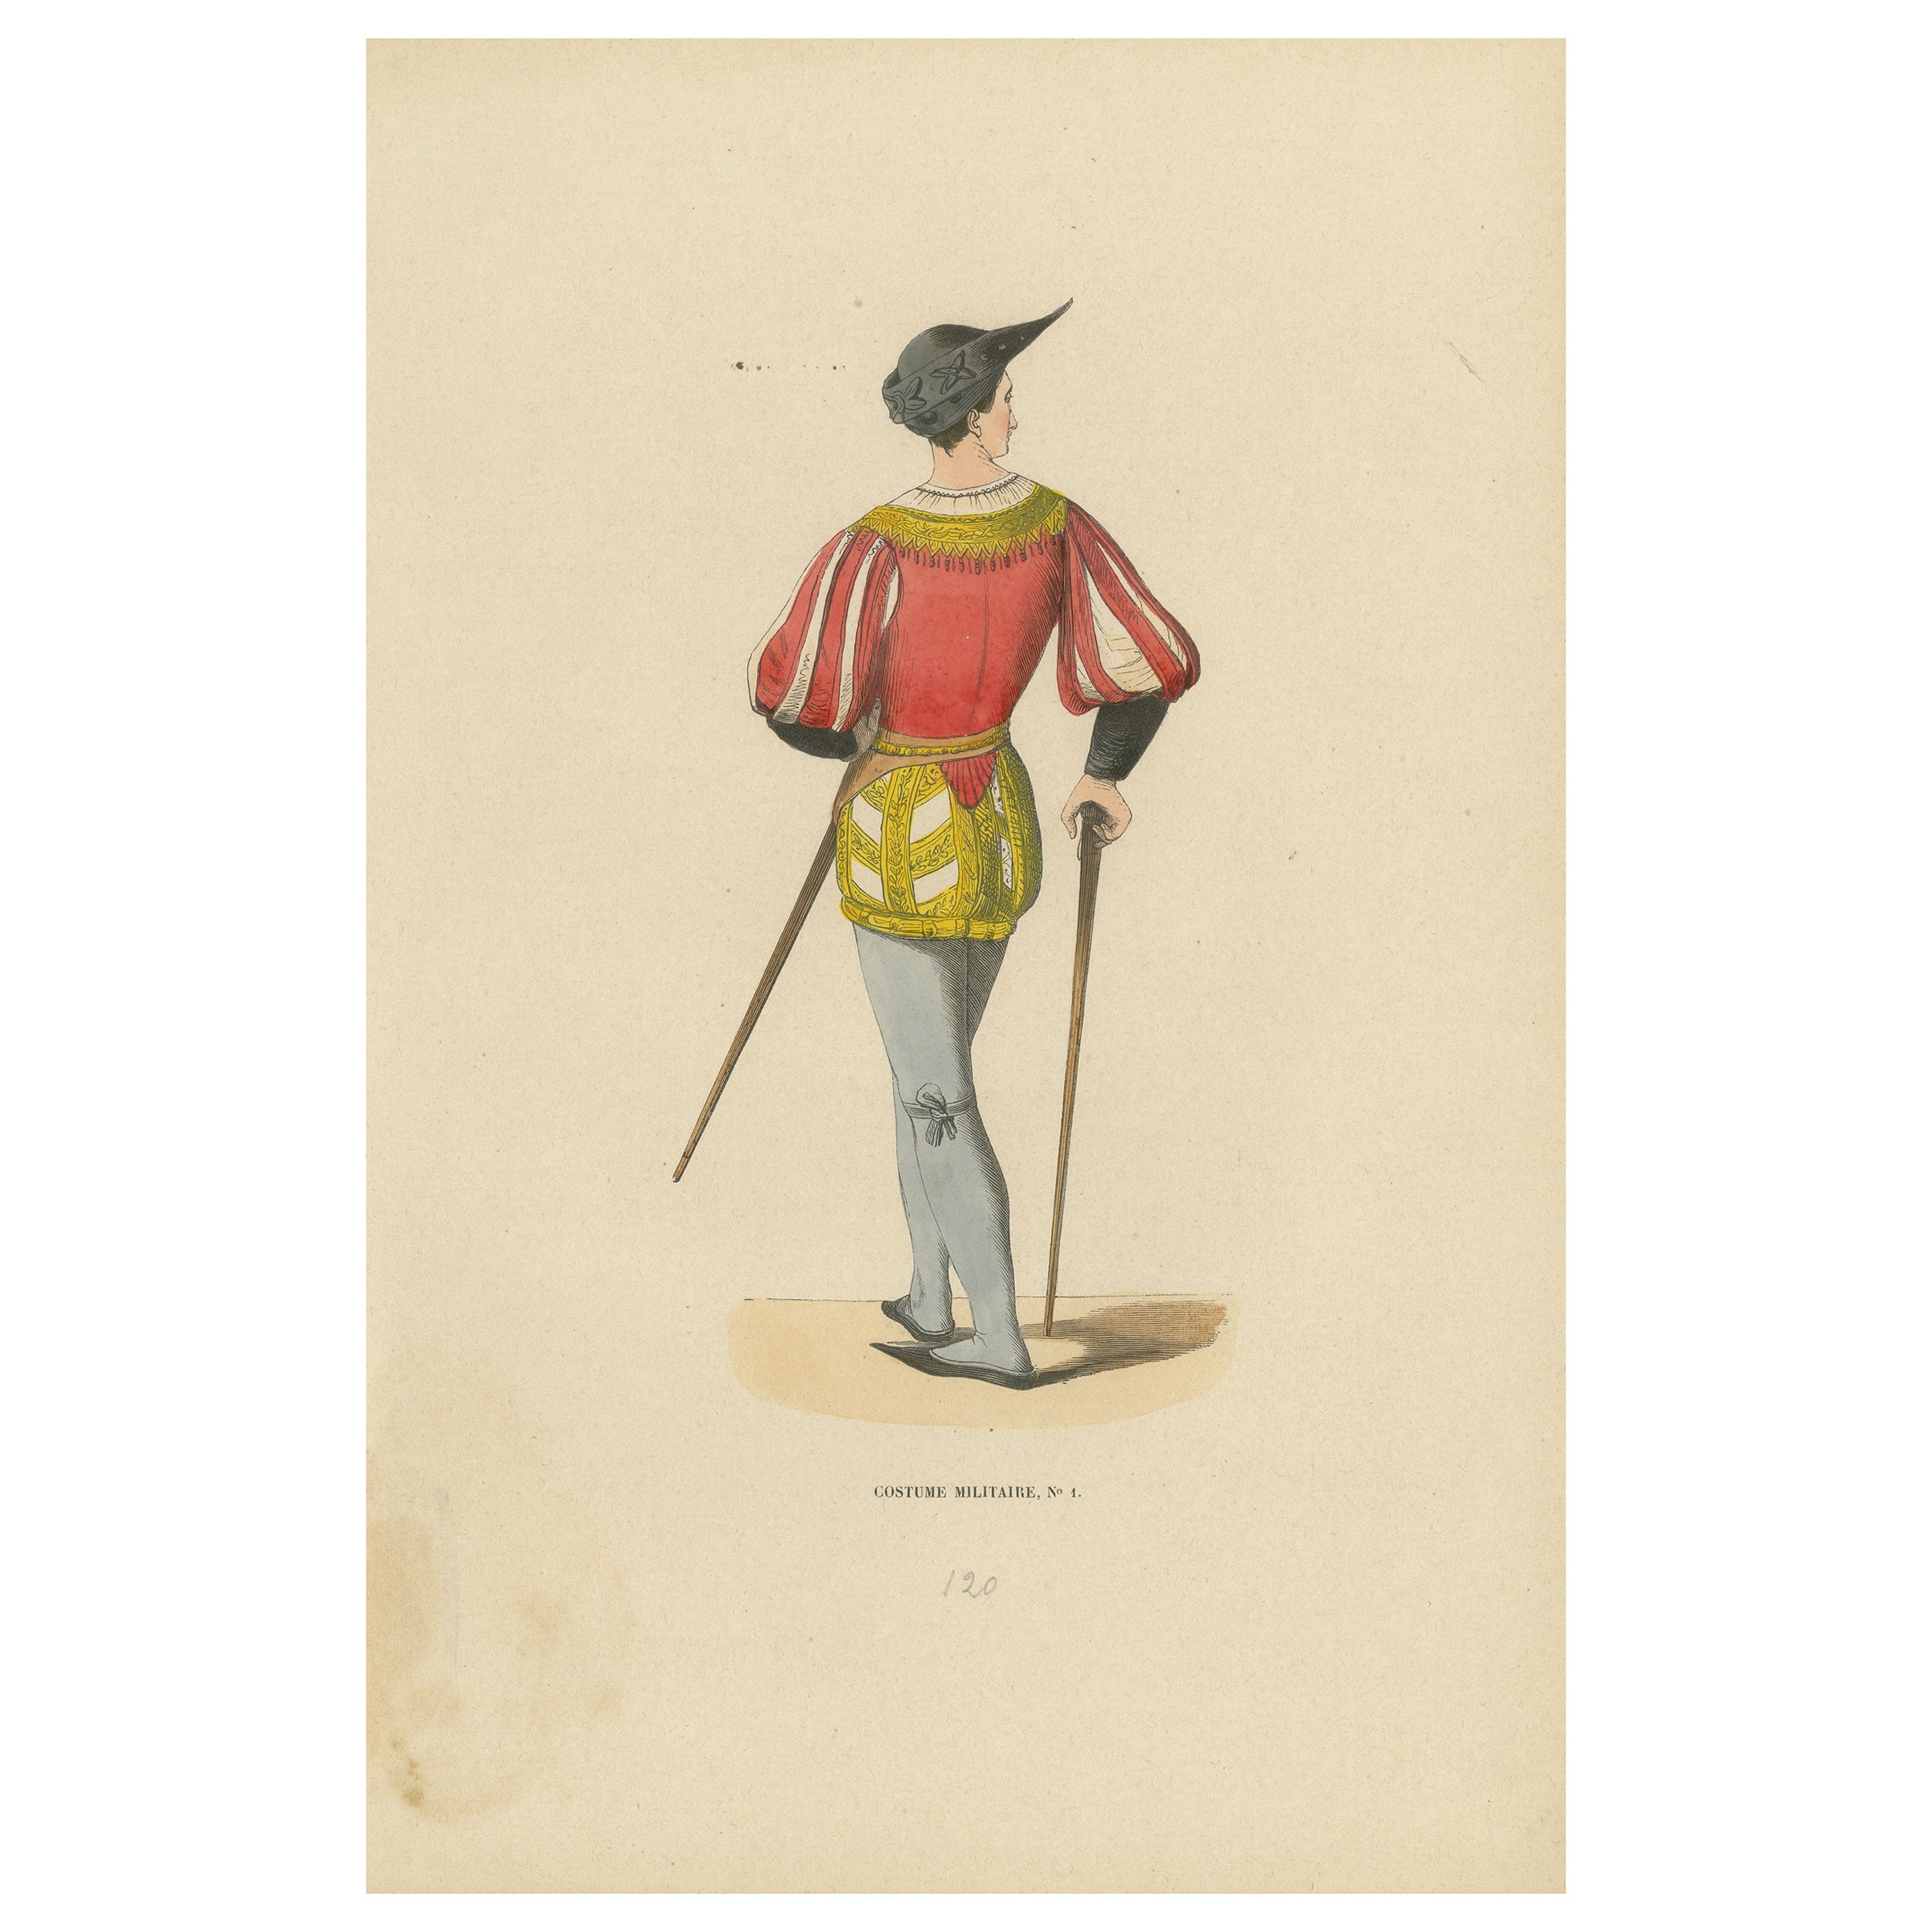 Regalia of Valor: The Distinguished Garb of a Medieval Soldier, 1847